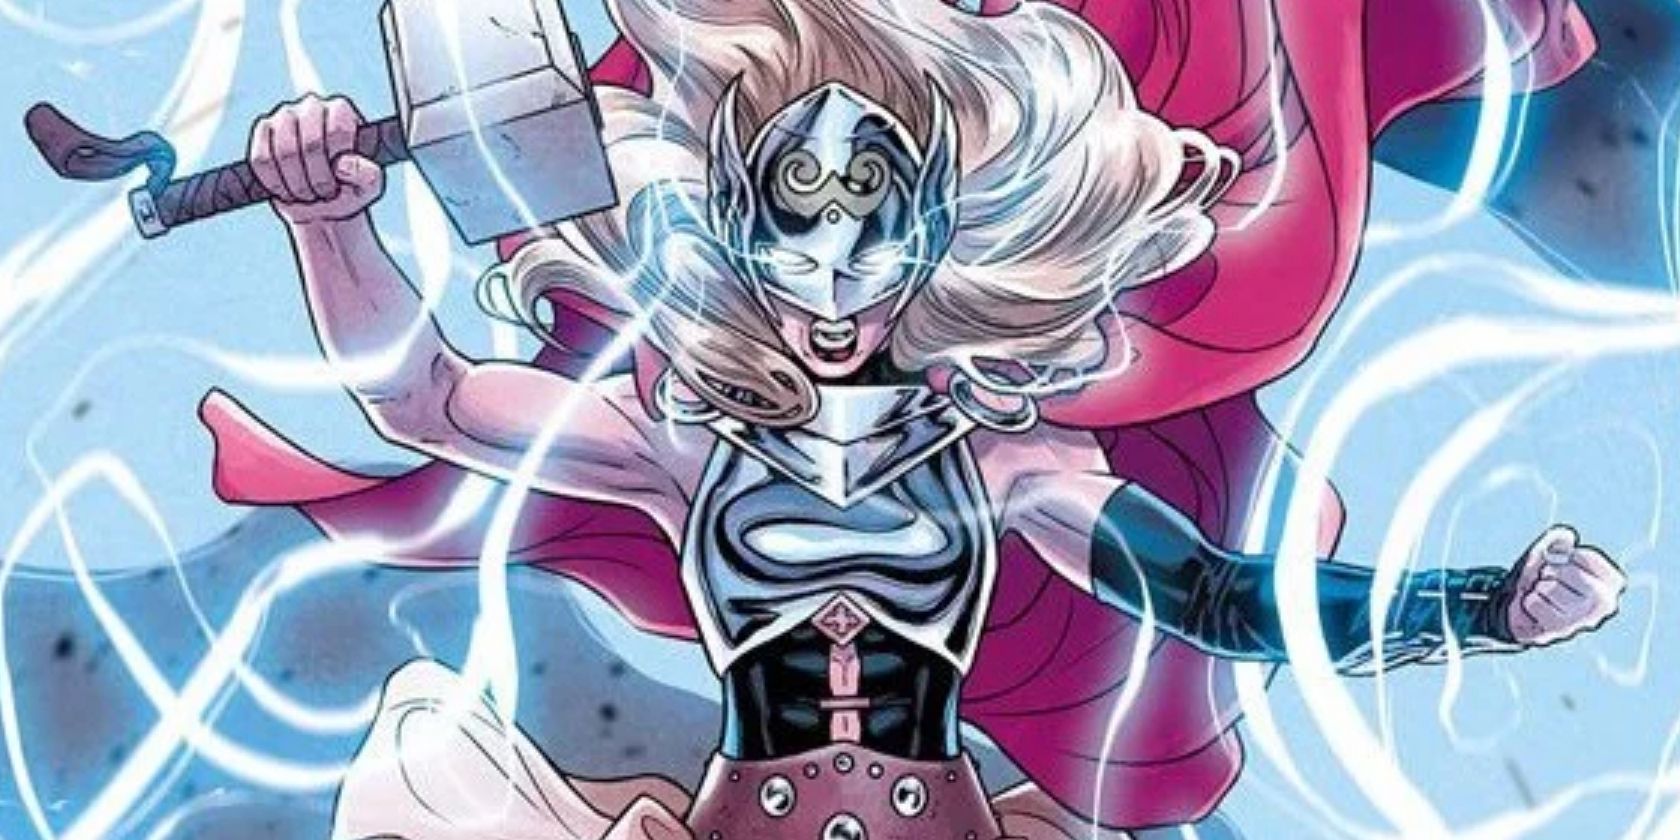 Jane Foster as Thor in Marvel Comics